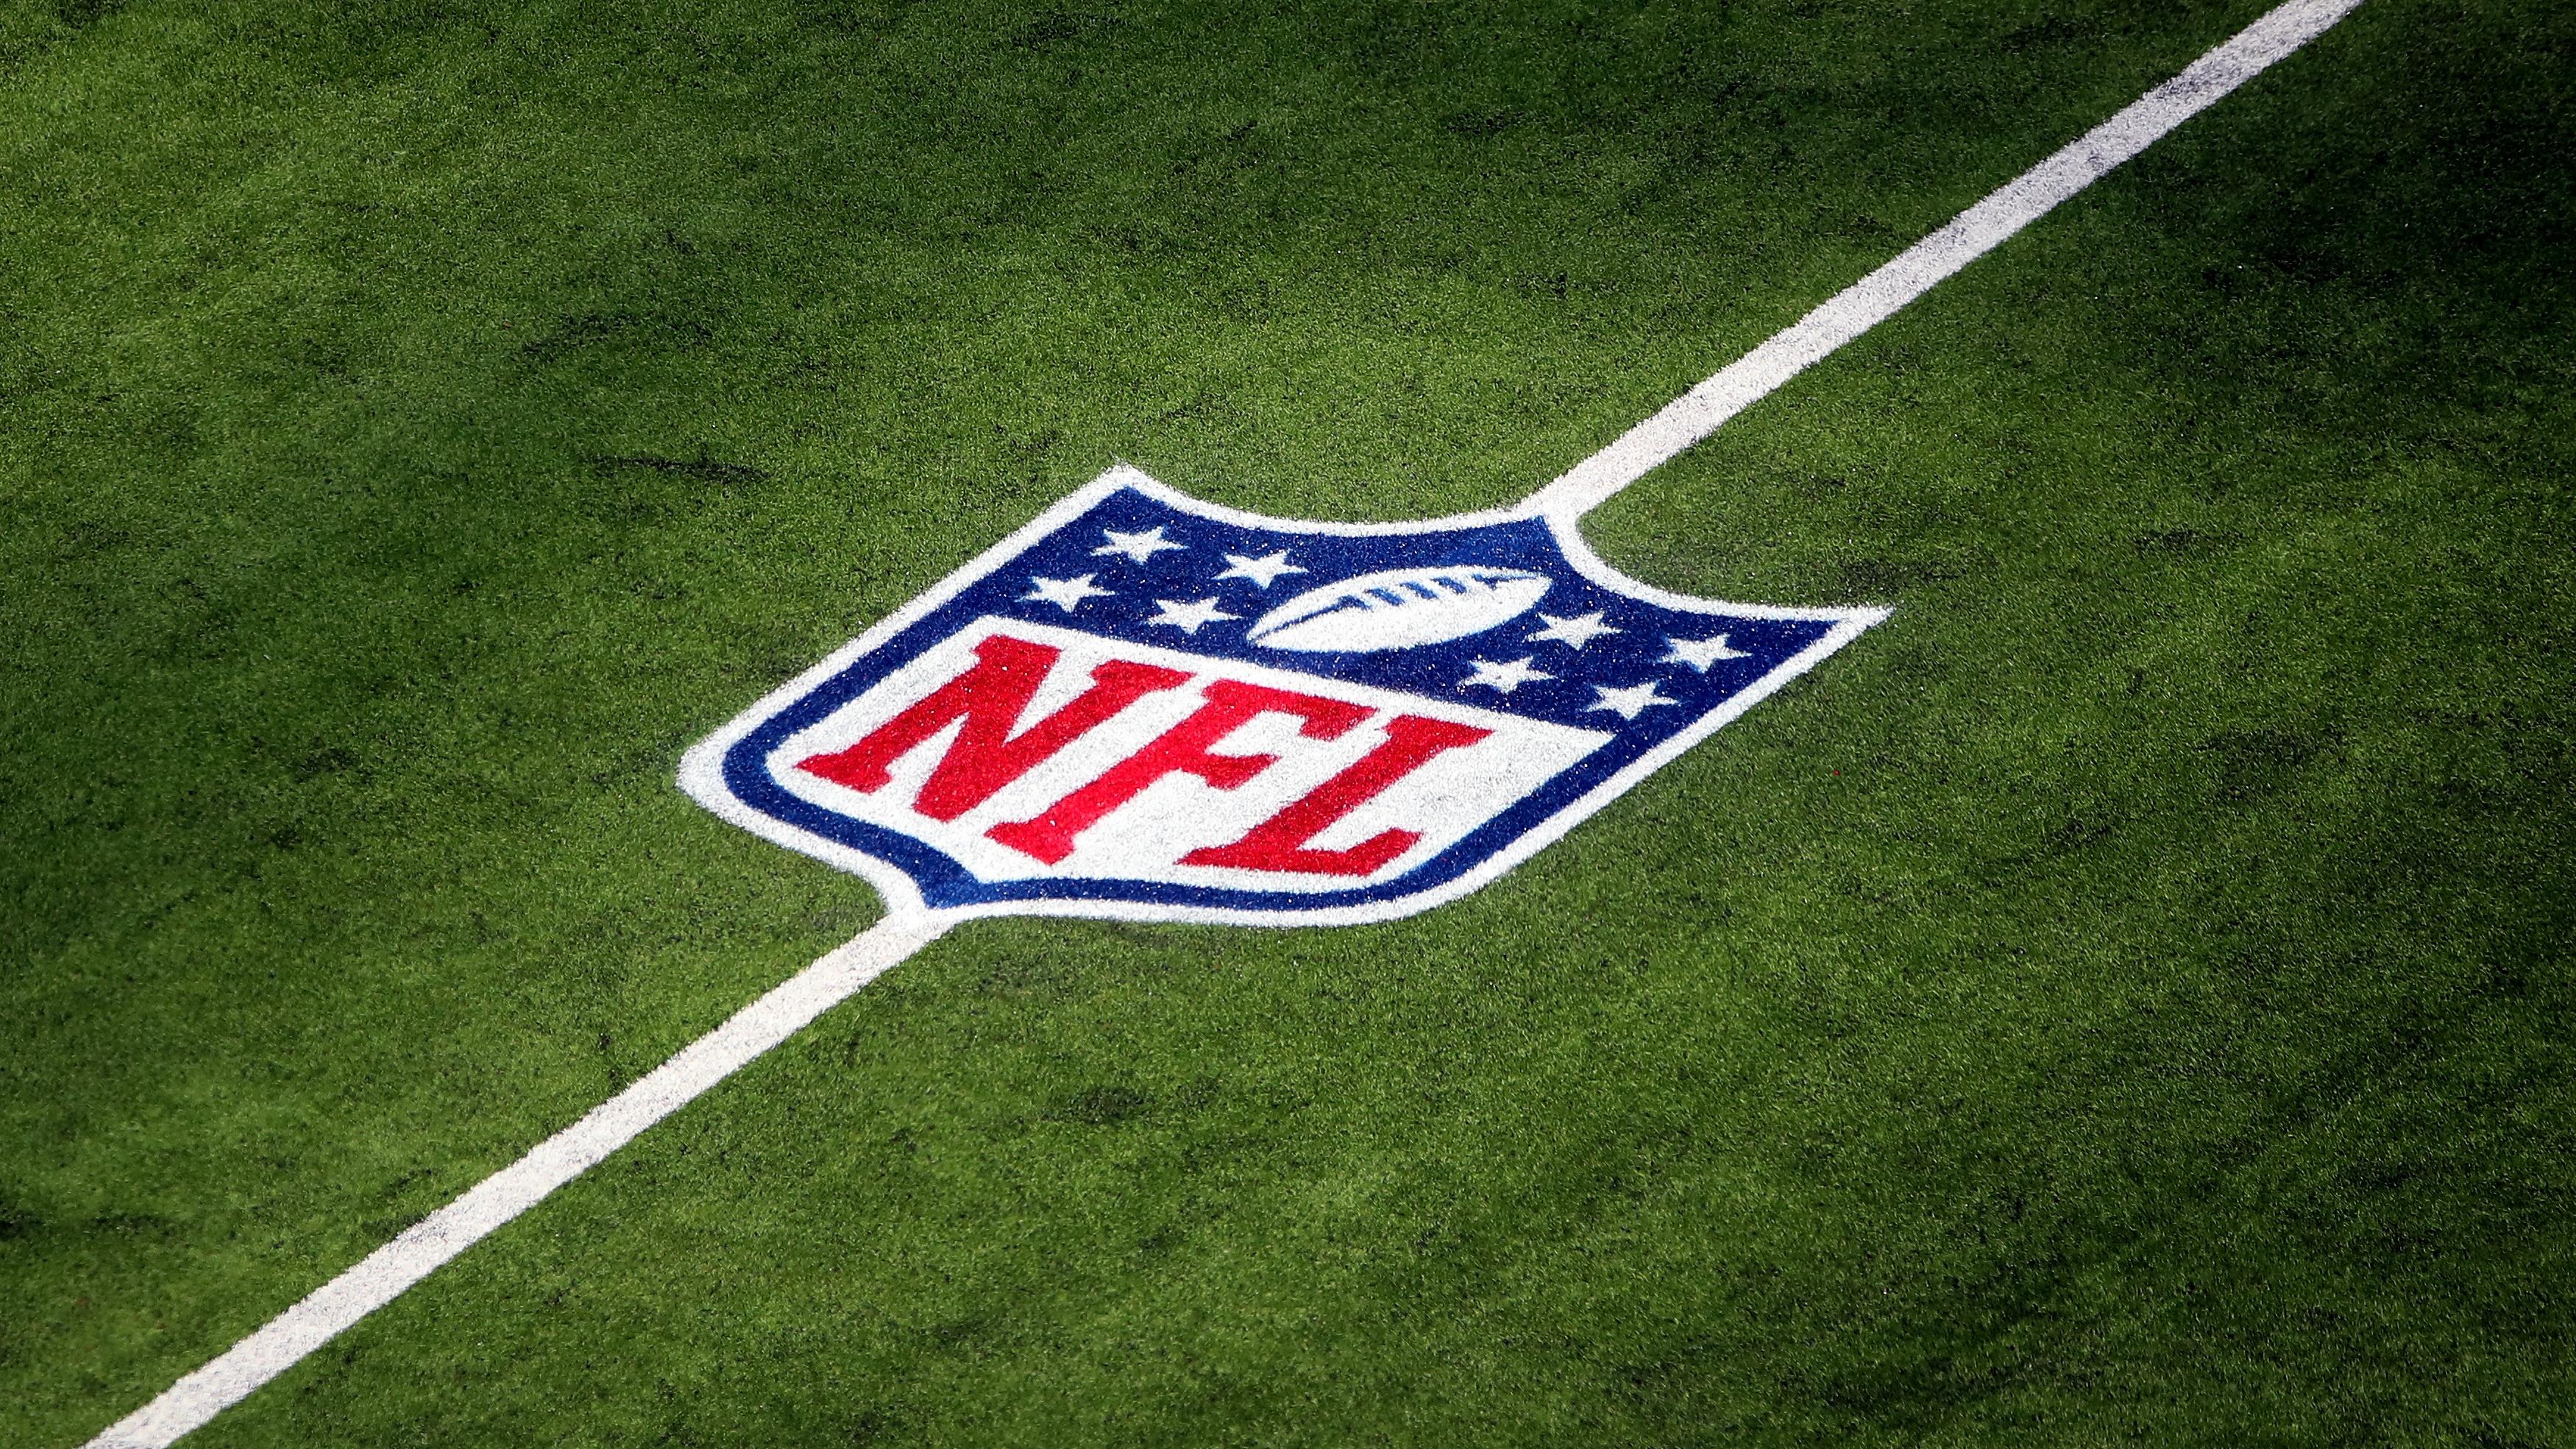 YouTube Reveals NFL Sunday Ticket Prices for 2023 Season